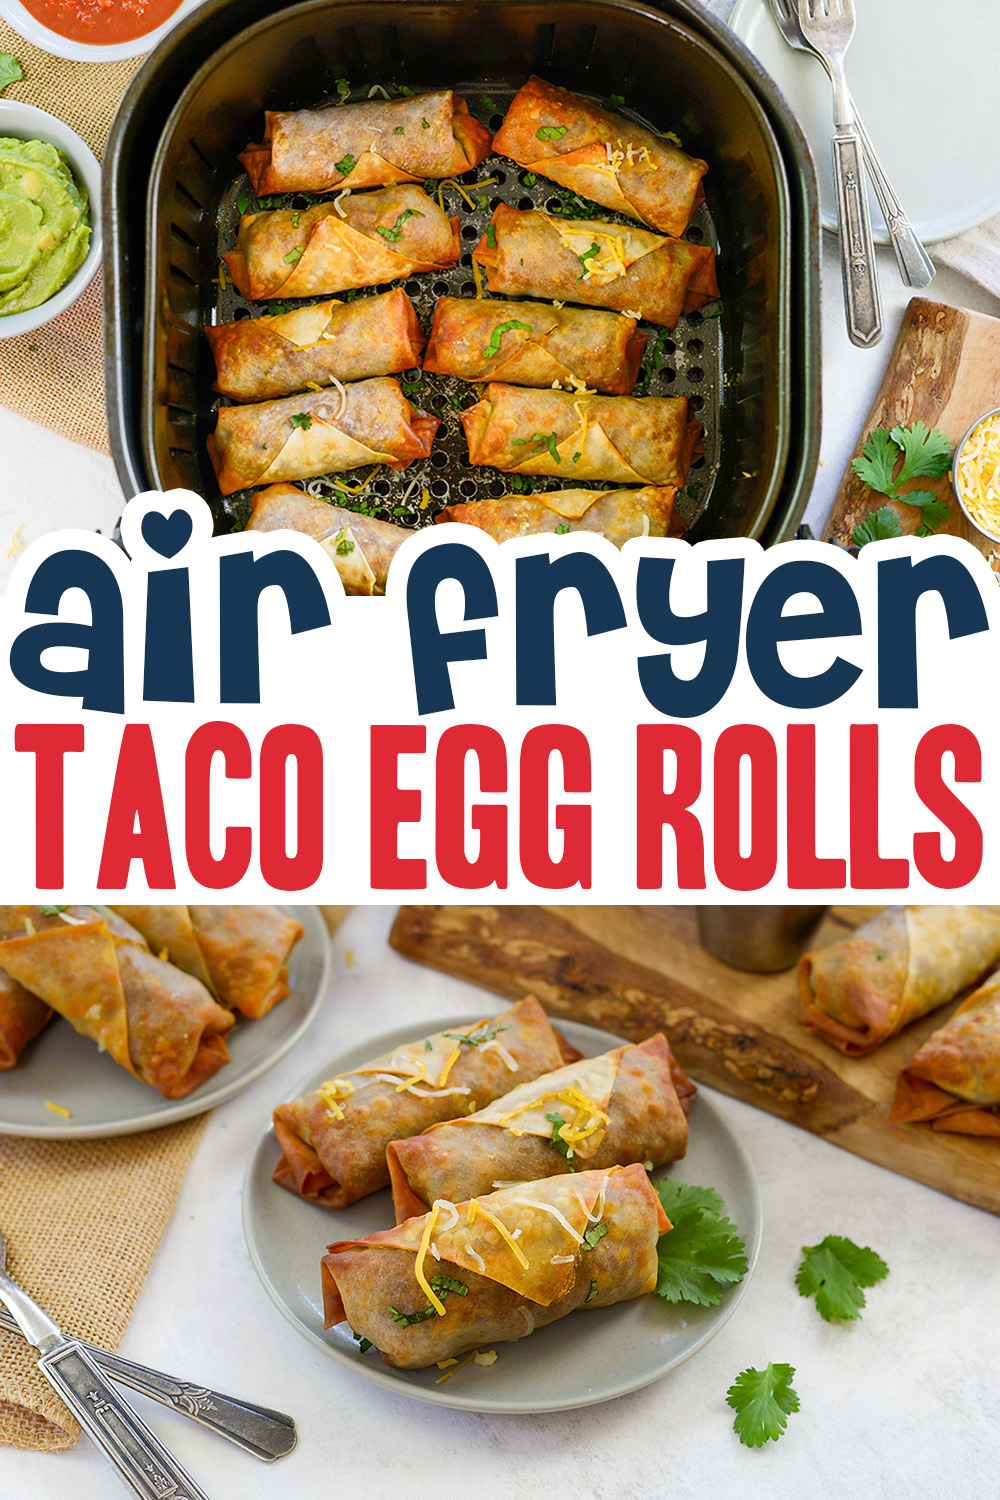 These air fried egg rolls are filled with a taco filling.  Perfect for dipping into a cup of guacamole!